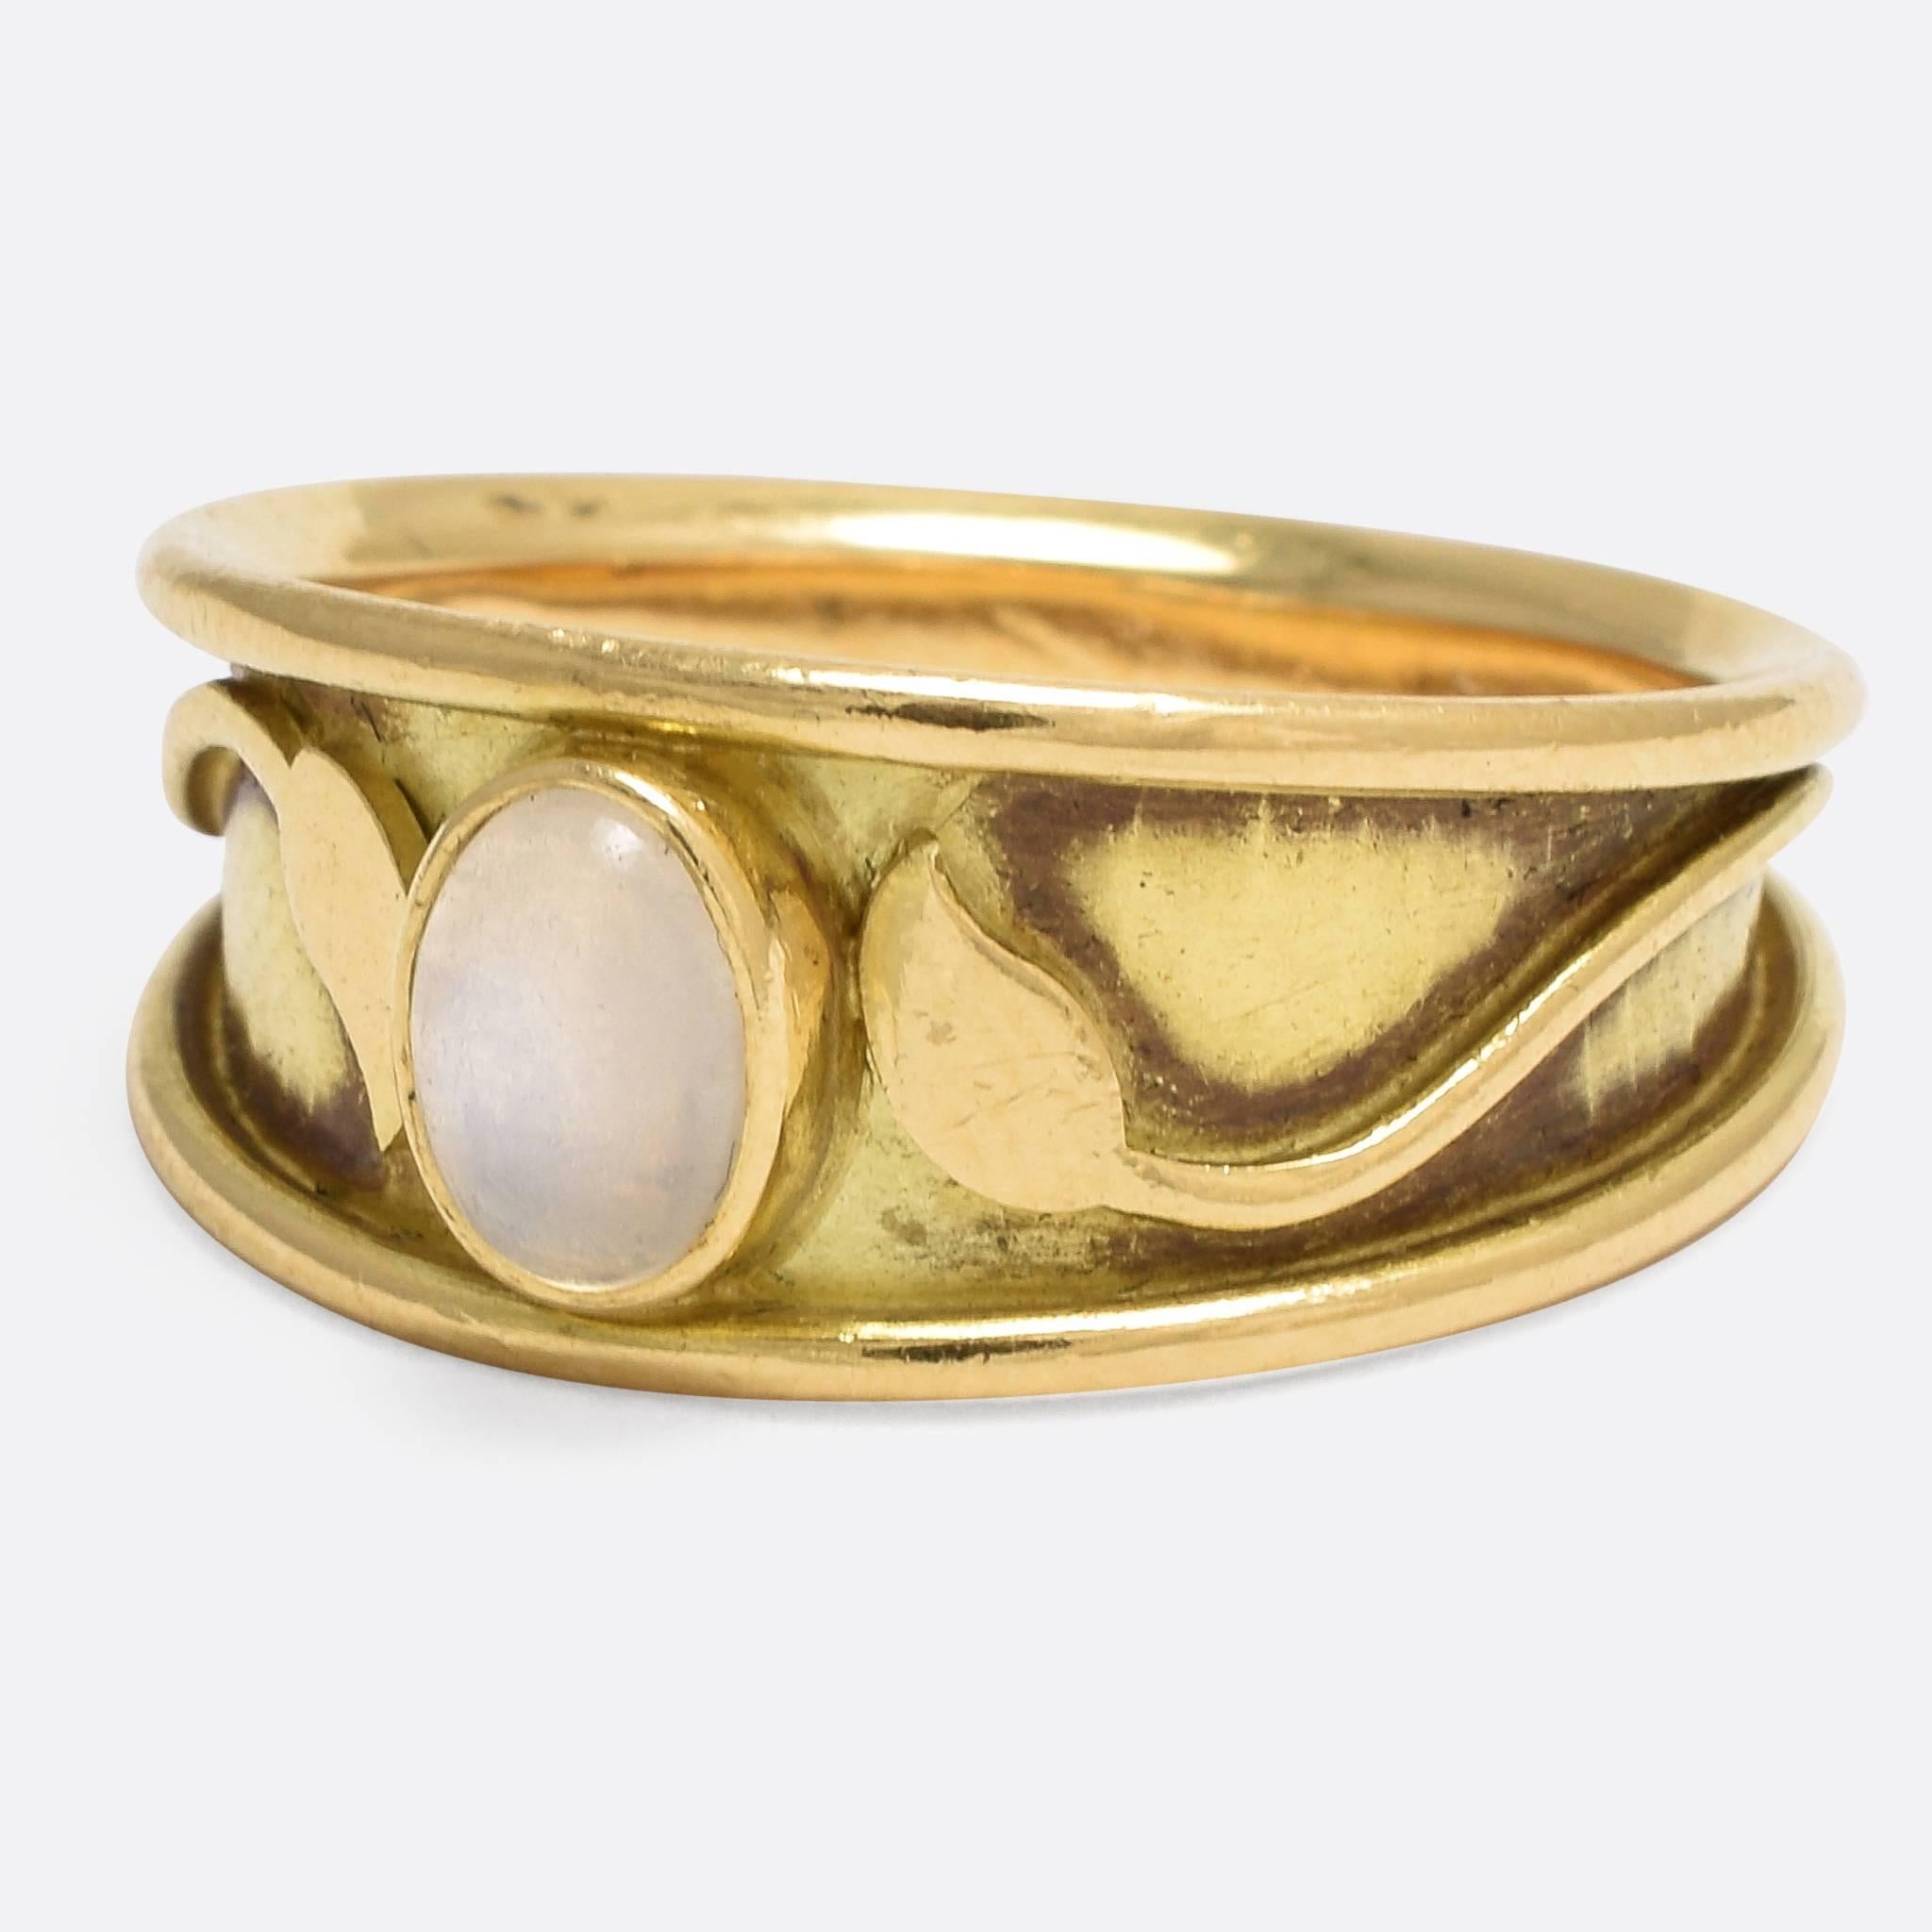 This stylish vintage ring was made by the popular jewellery designer Elizabeth Gage, and is a fine example of her early era work. Set with an oval moonstone cabochon, the ring features leaf and branch motifs, harking back to the styling of the Art